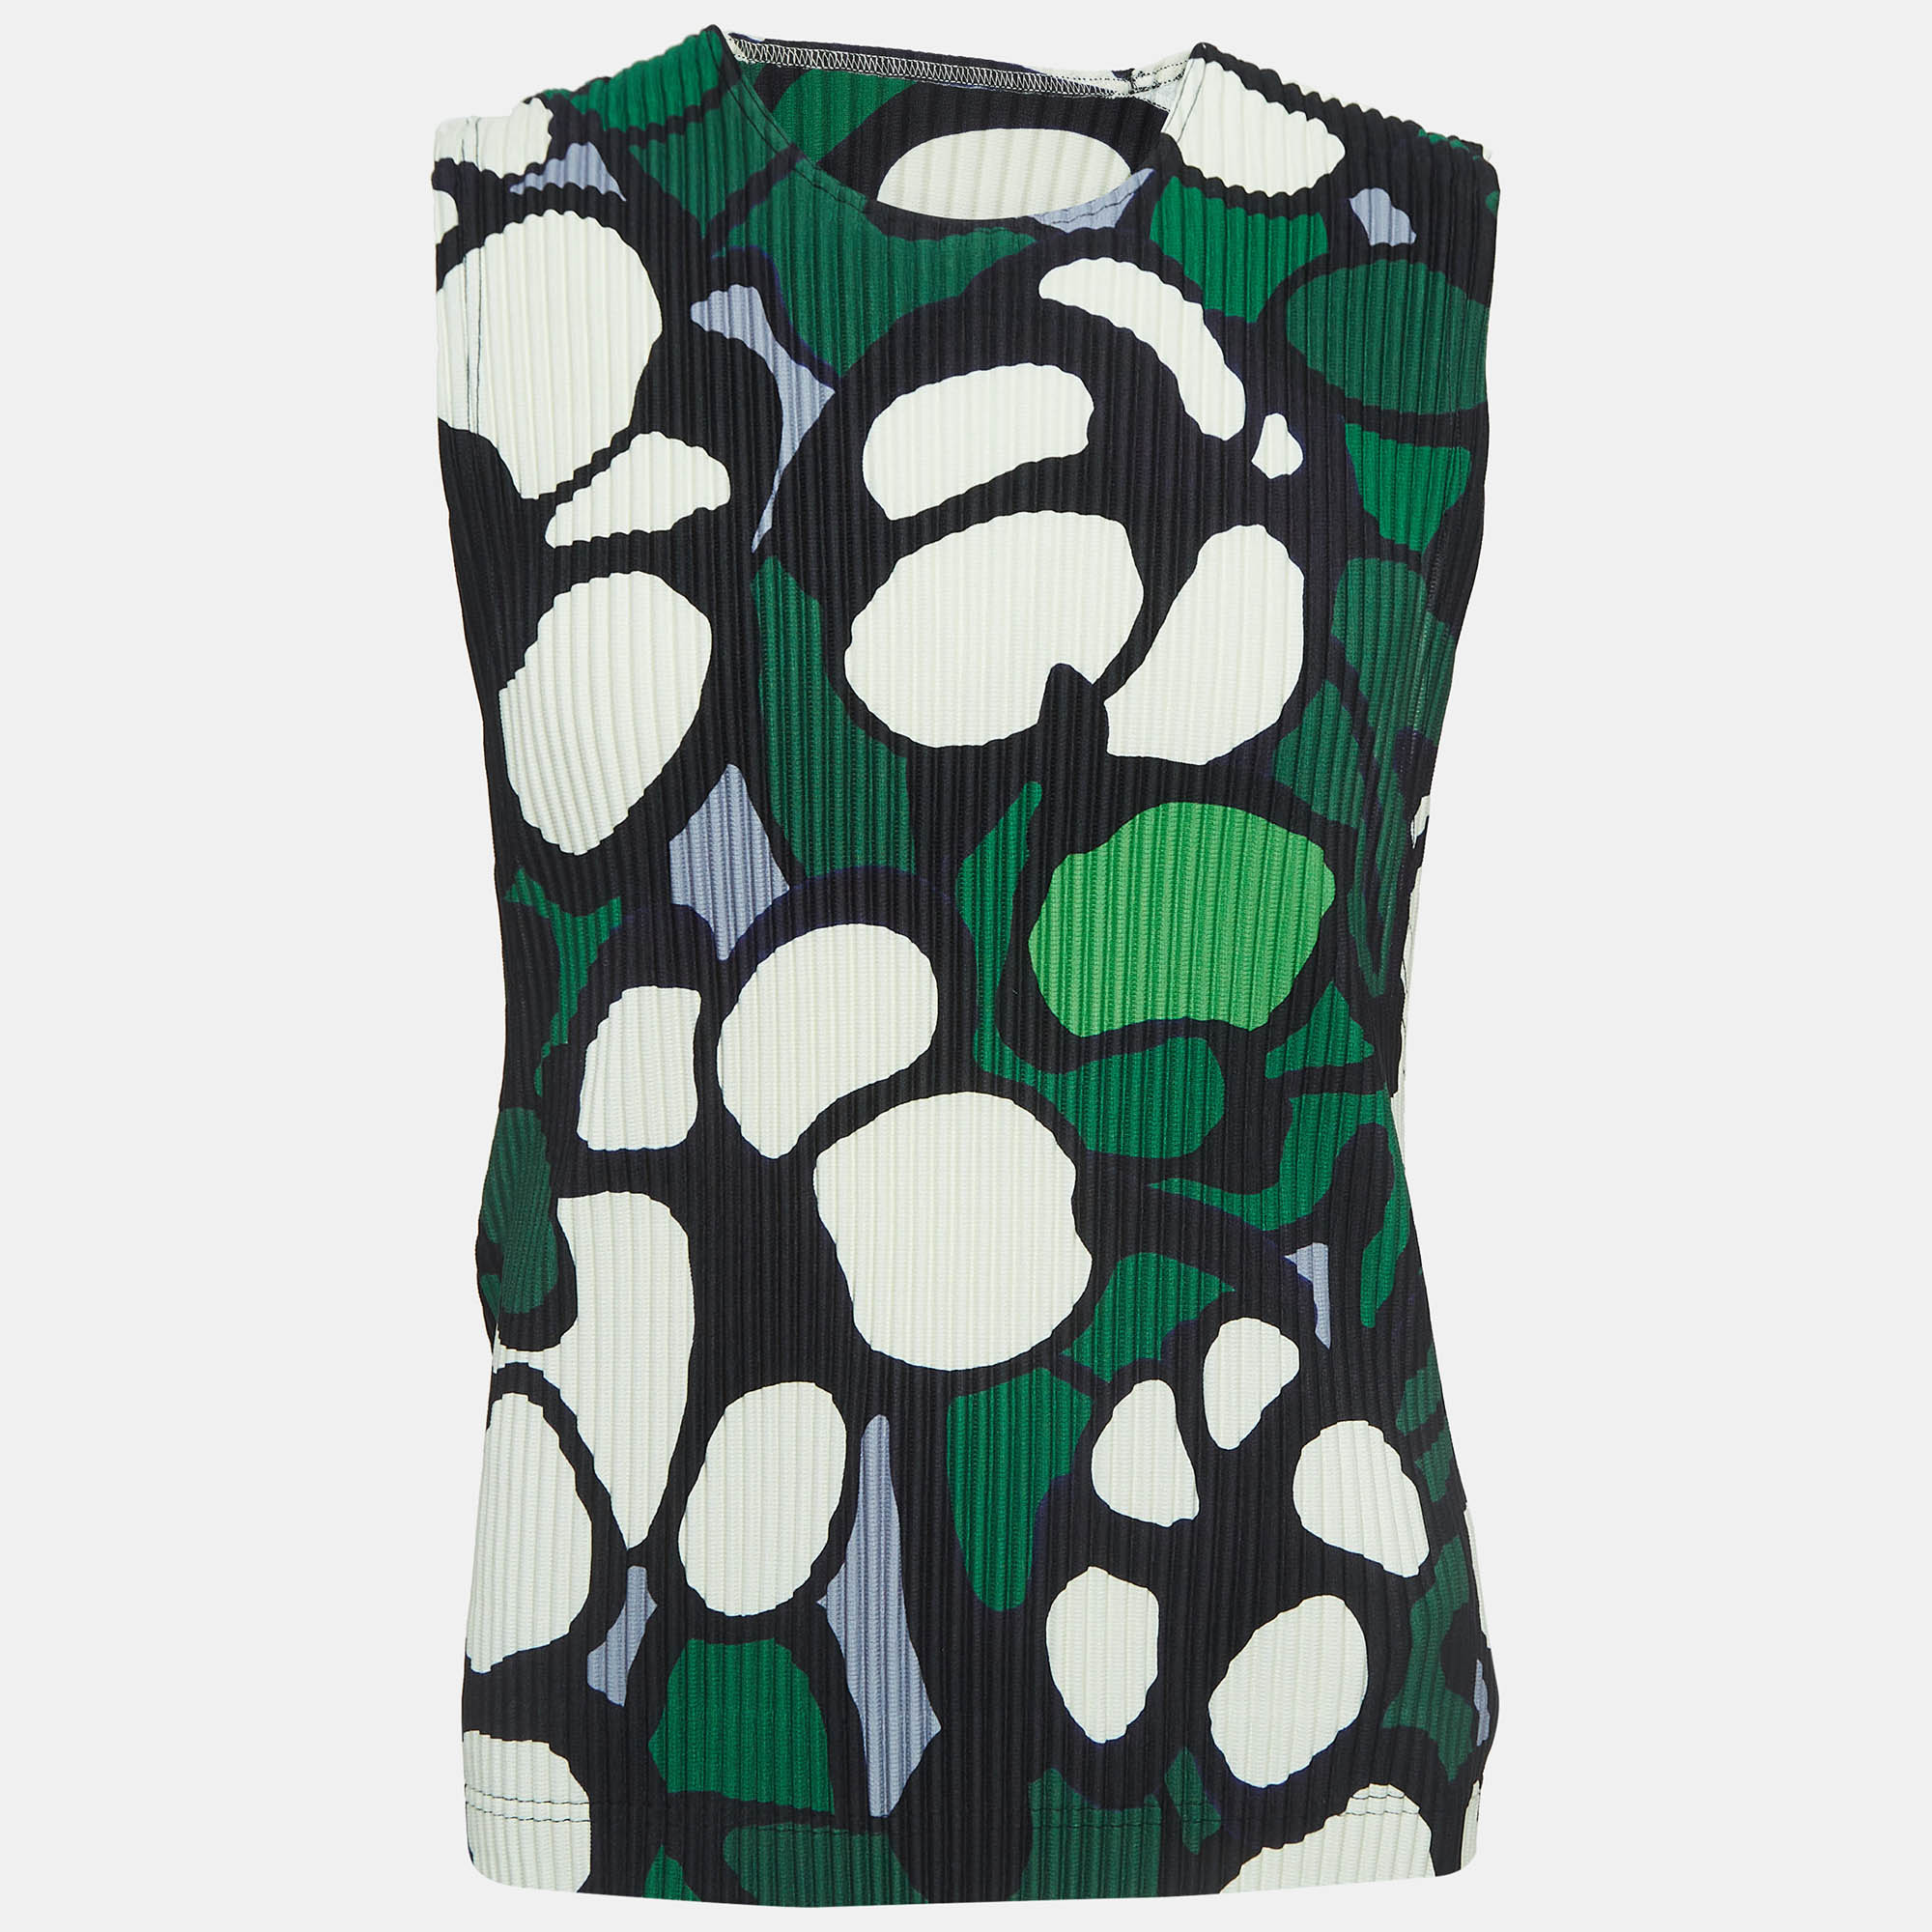 Issey miyake homme plisse issey miyale homme plisse green printed stretch knit tank top one size